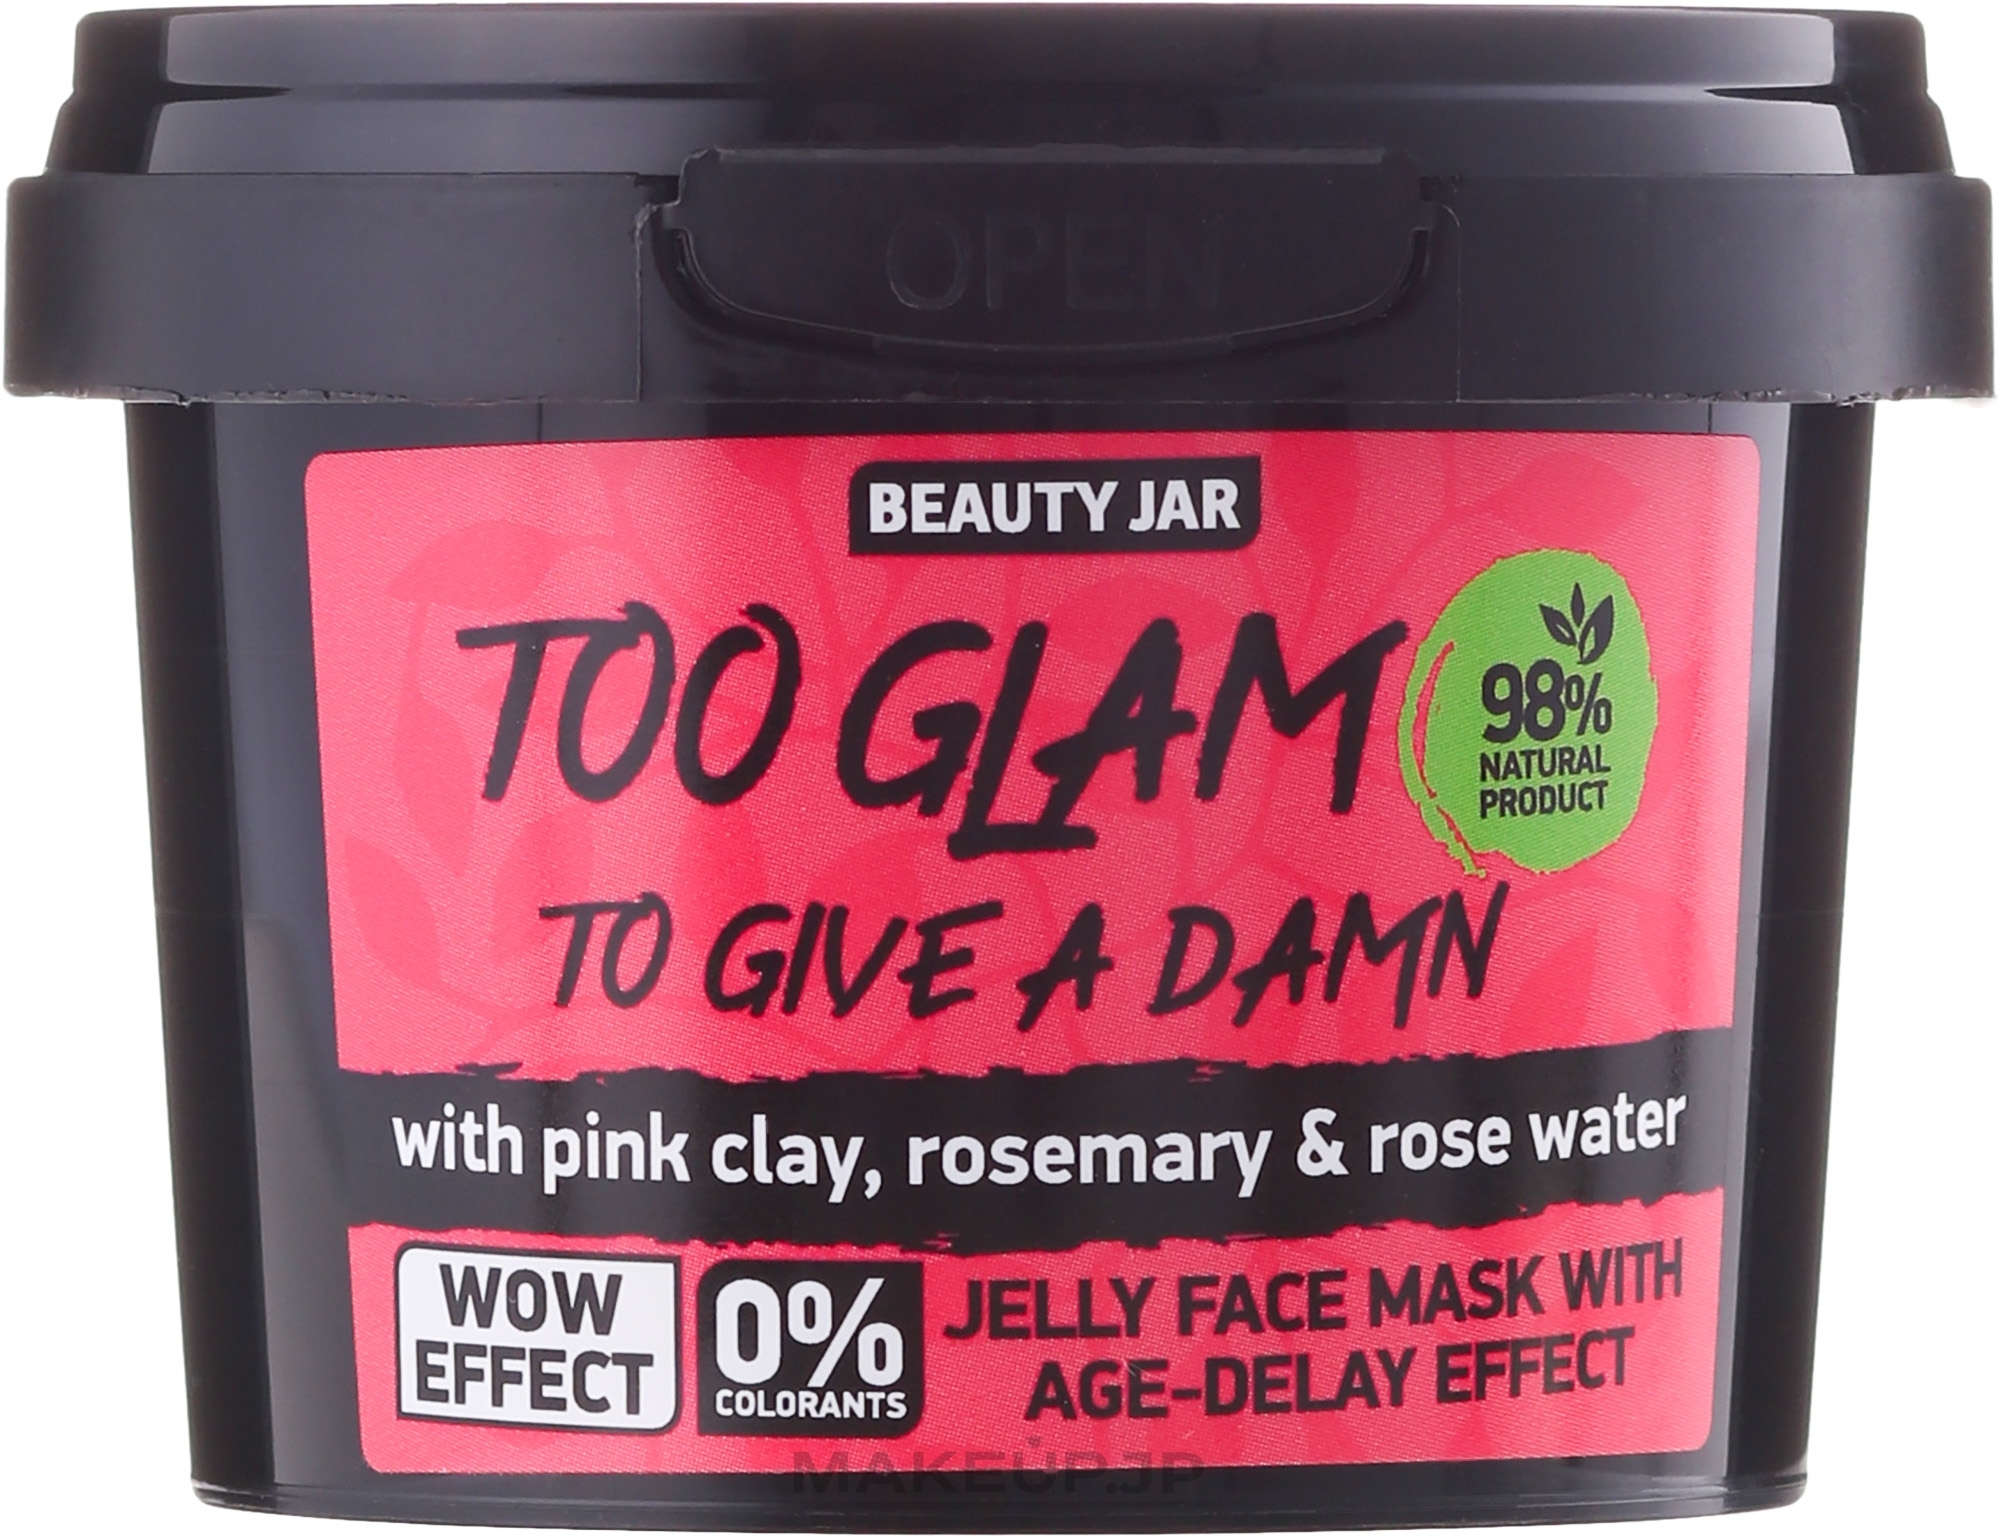 Lifting Jelly Mask - Beauty Jar Too Glam To Give A Damn Face Mask — photo 120 g